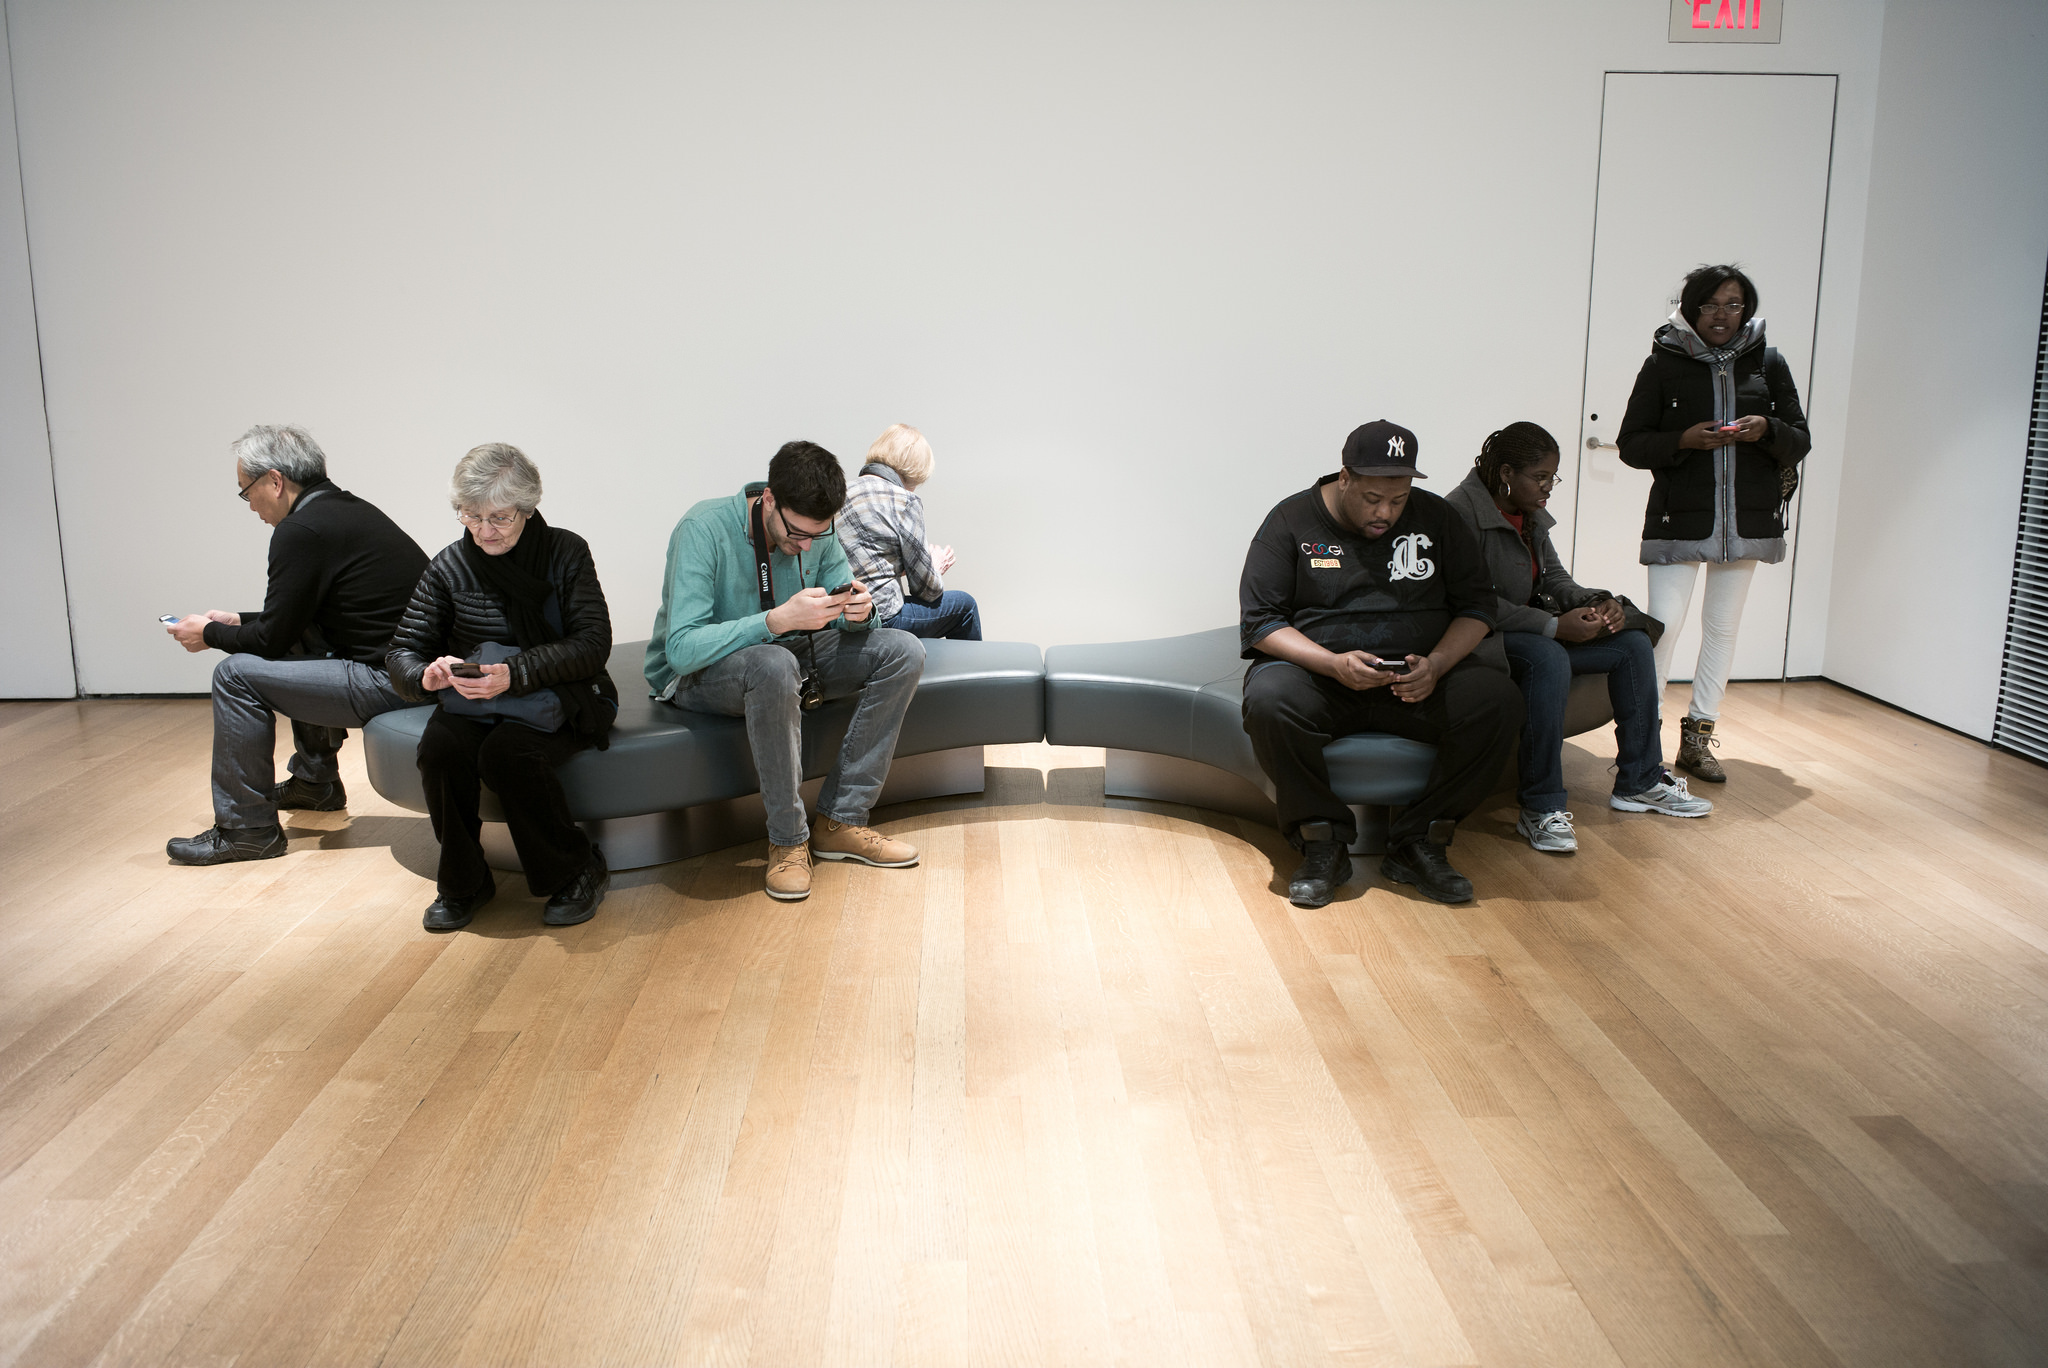 On and around a museum bench, seven different people each bows their head over their respective smartphone.